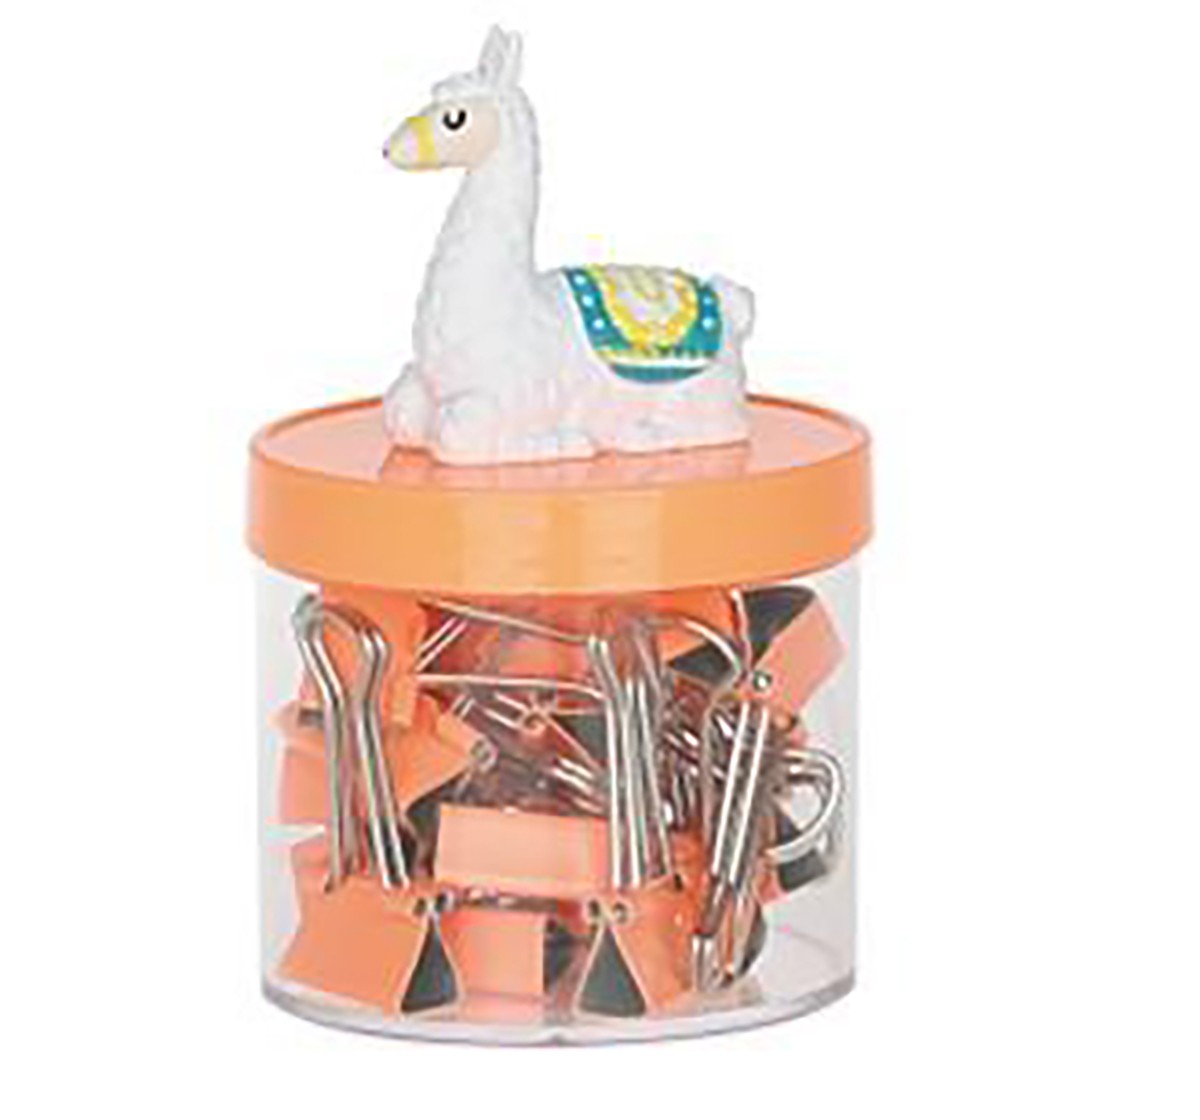 Syloon Llama Binder Clips Box of 20 Study & Desk Accessories for Kids age 3Y+ 